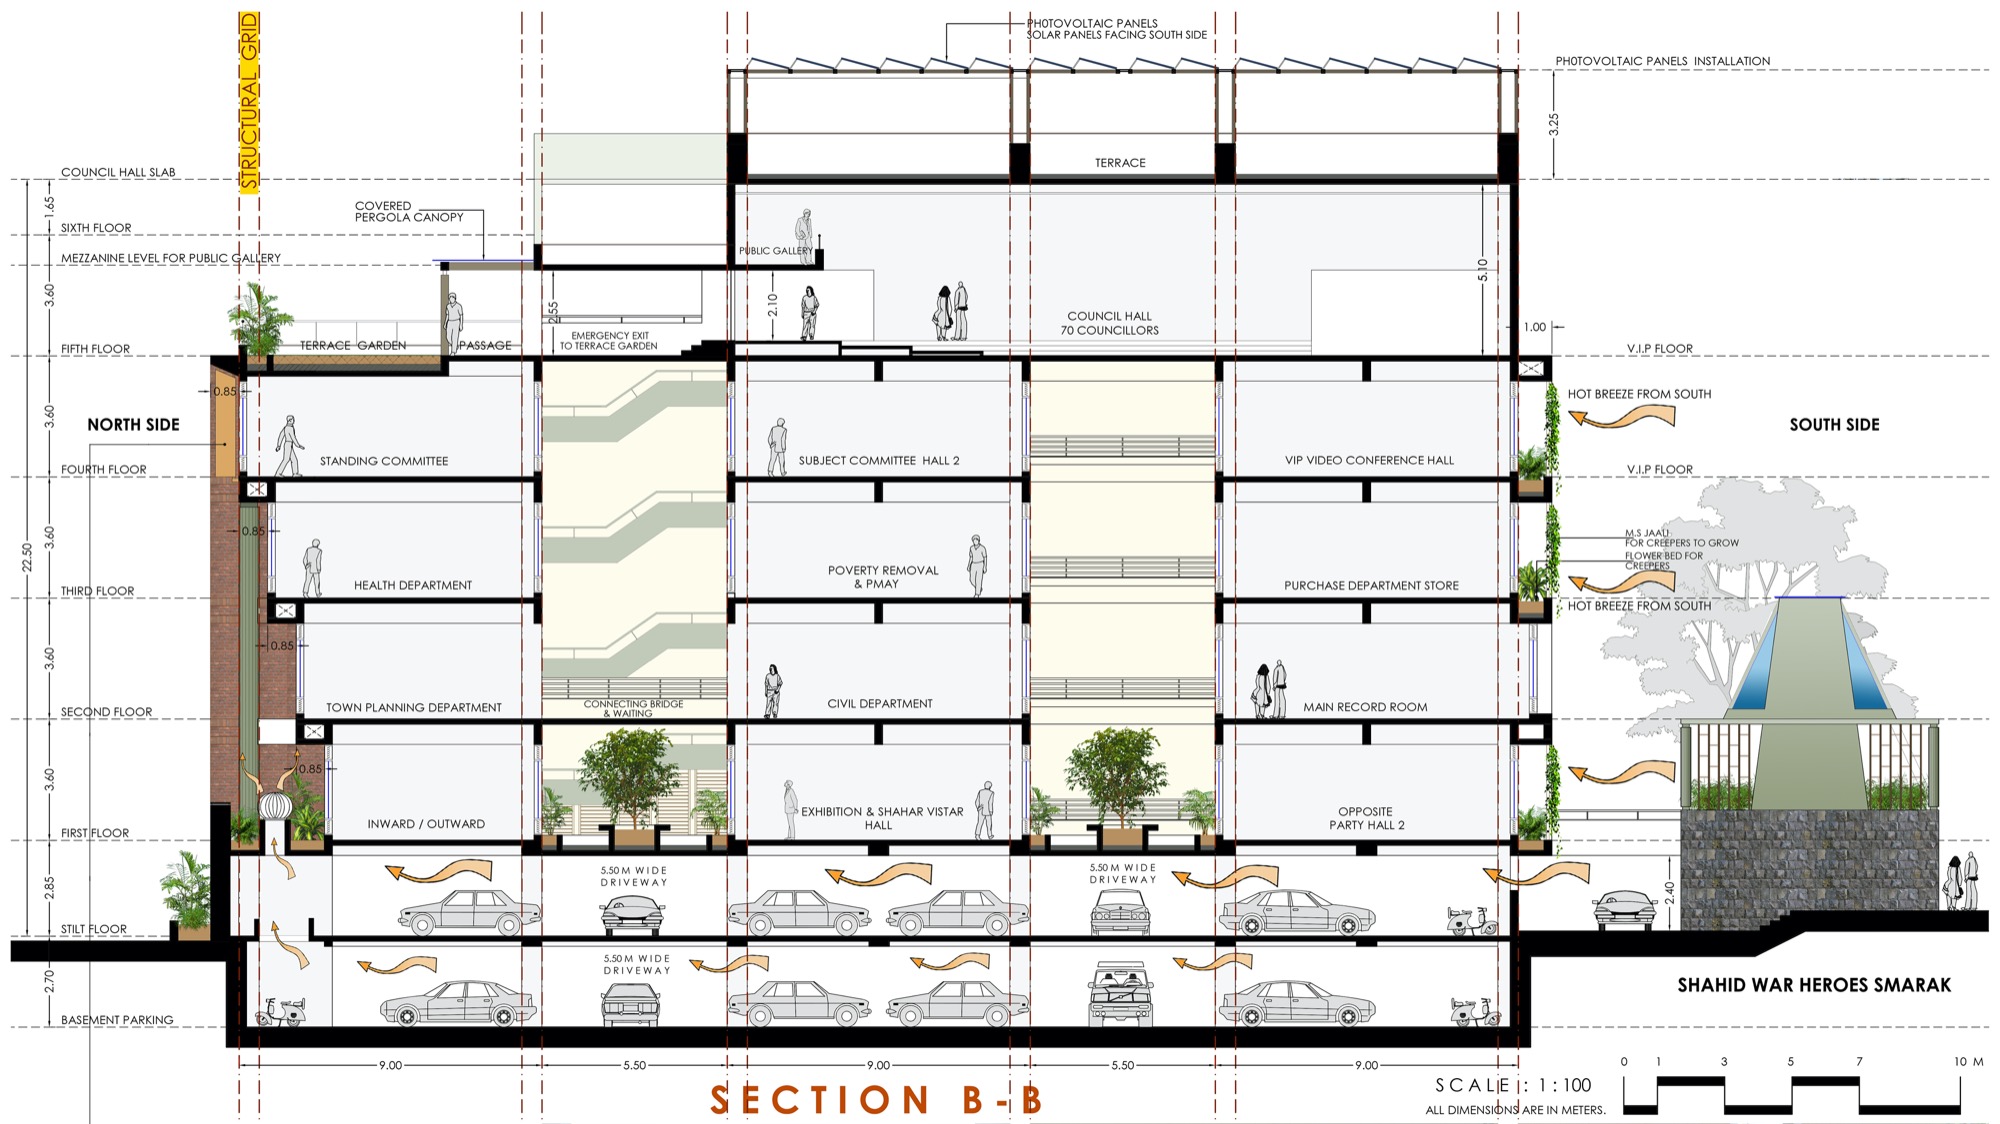 Satara Municipal Corporation, Competition Entry by KENARCH Architects, Pune 58